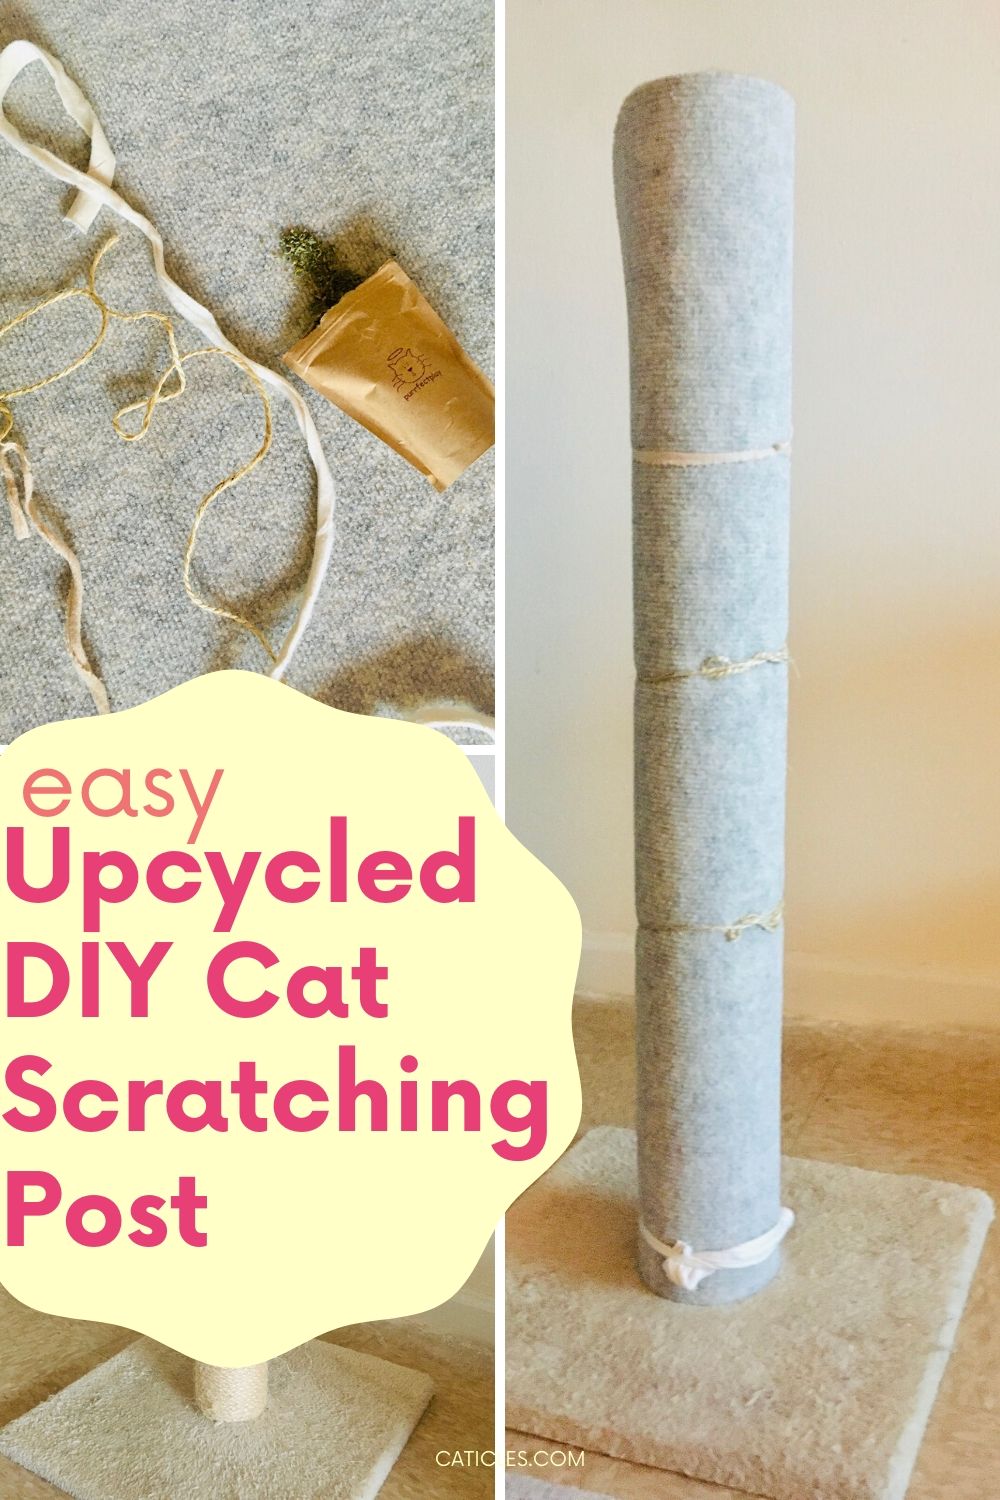 How To Build An Easy DIY Cat Scratching Post And Cat Tree Daily Paws ...